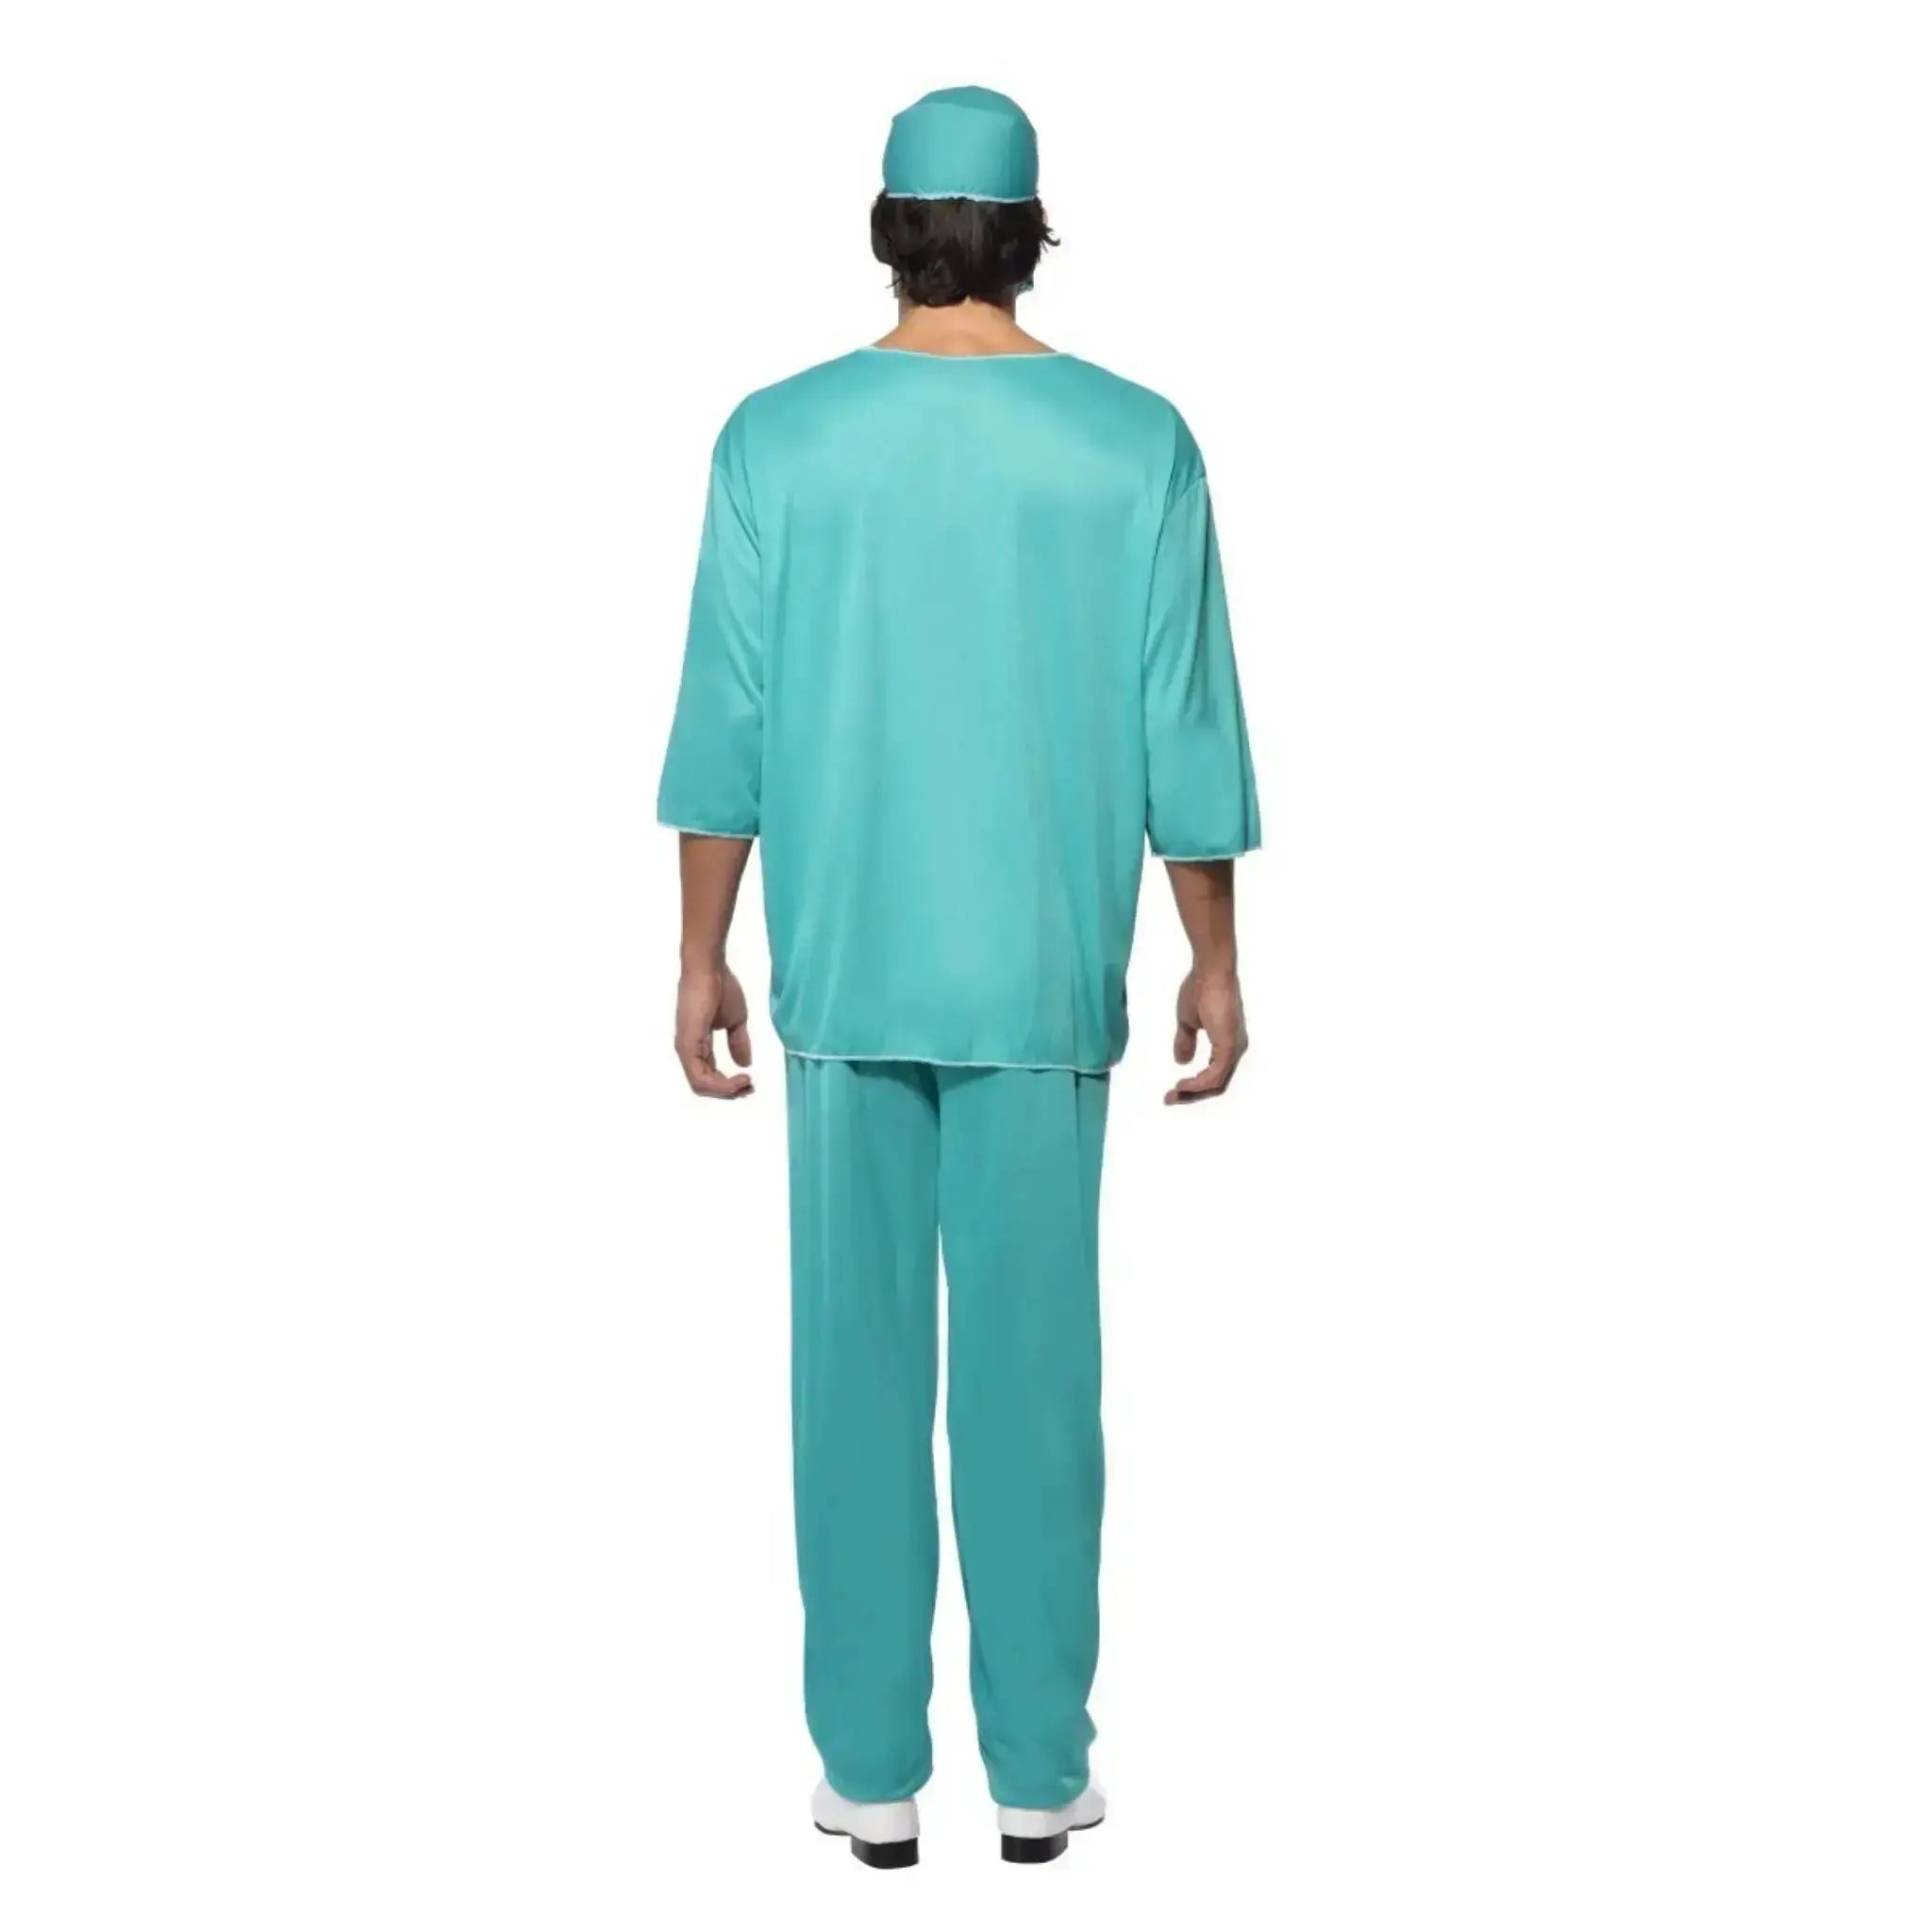 Surgeon Adults Costume 🩸 | The Party Hut